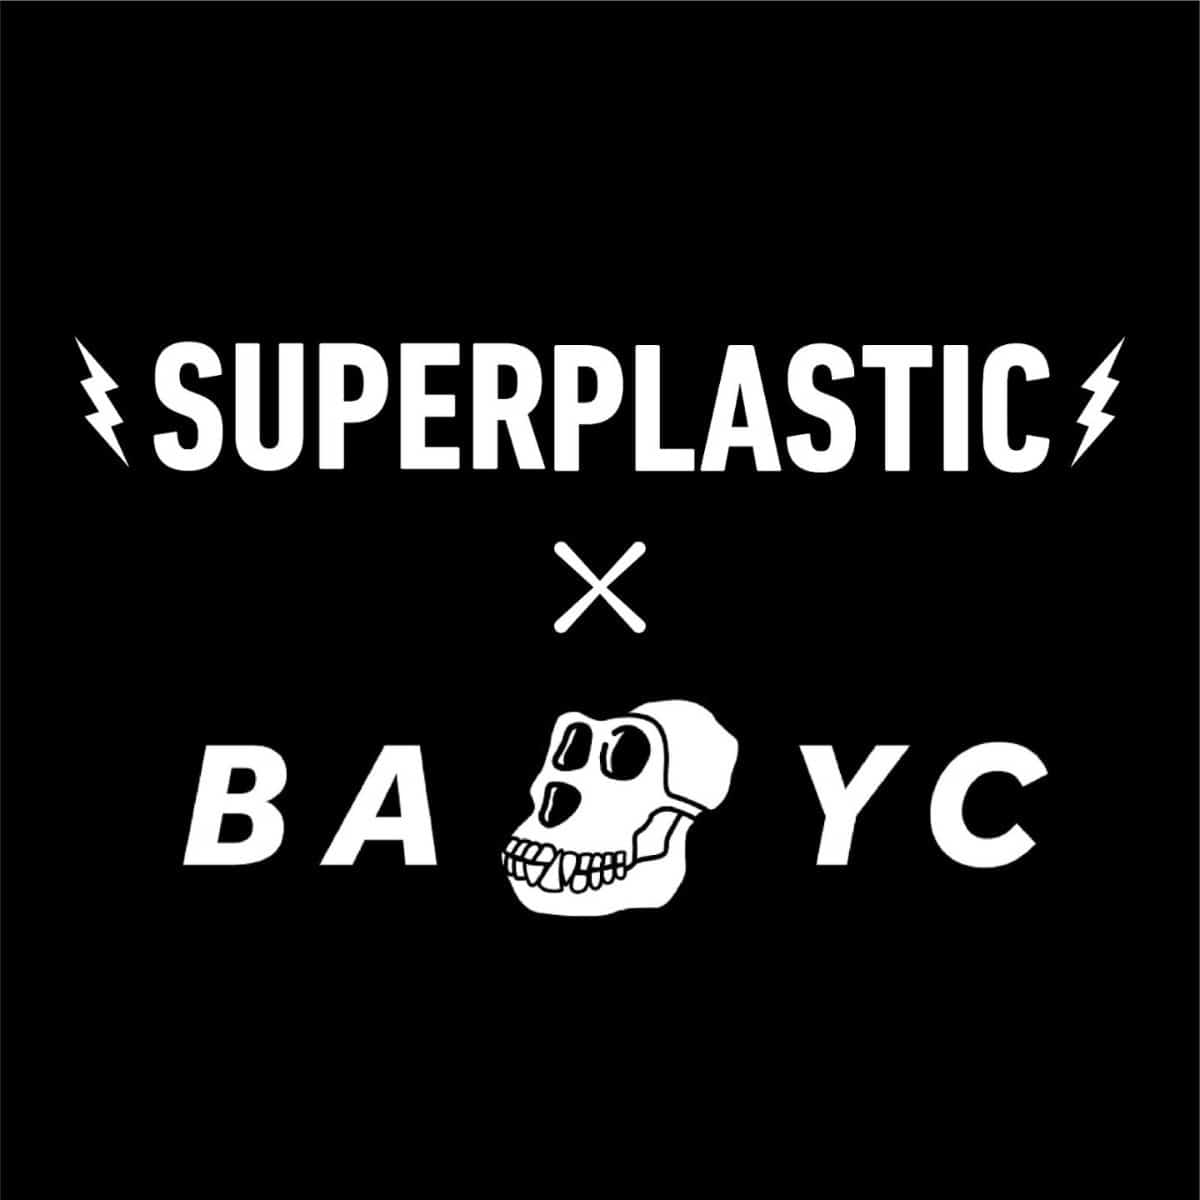 Superplastic x BAYC banner announcing Bored Ape Yacht Club Toys